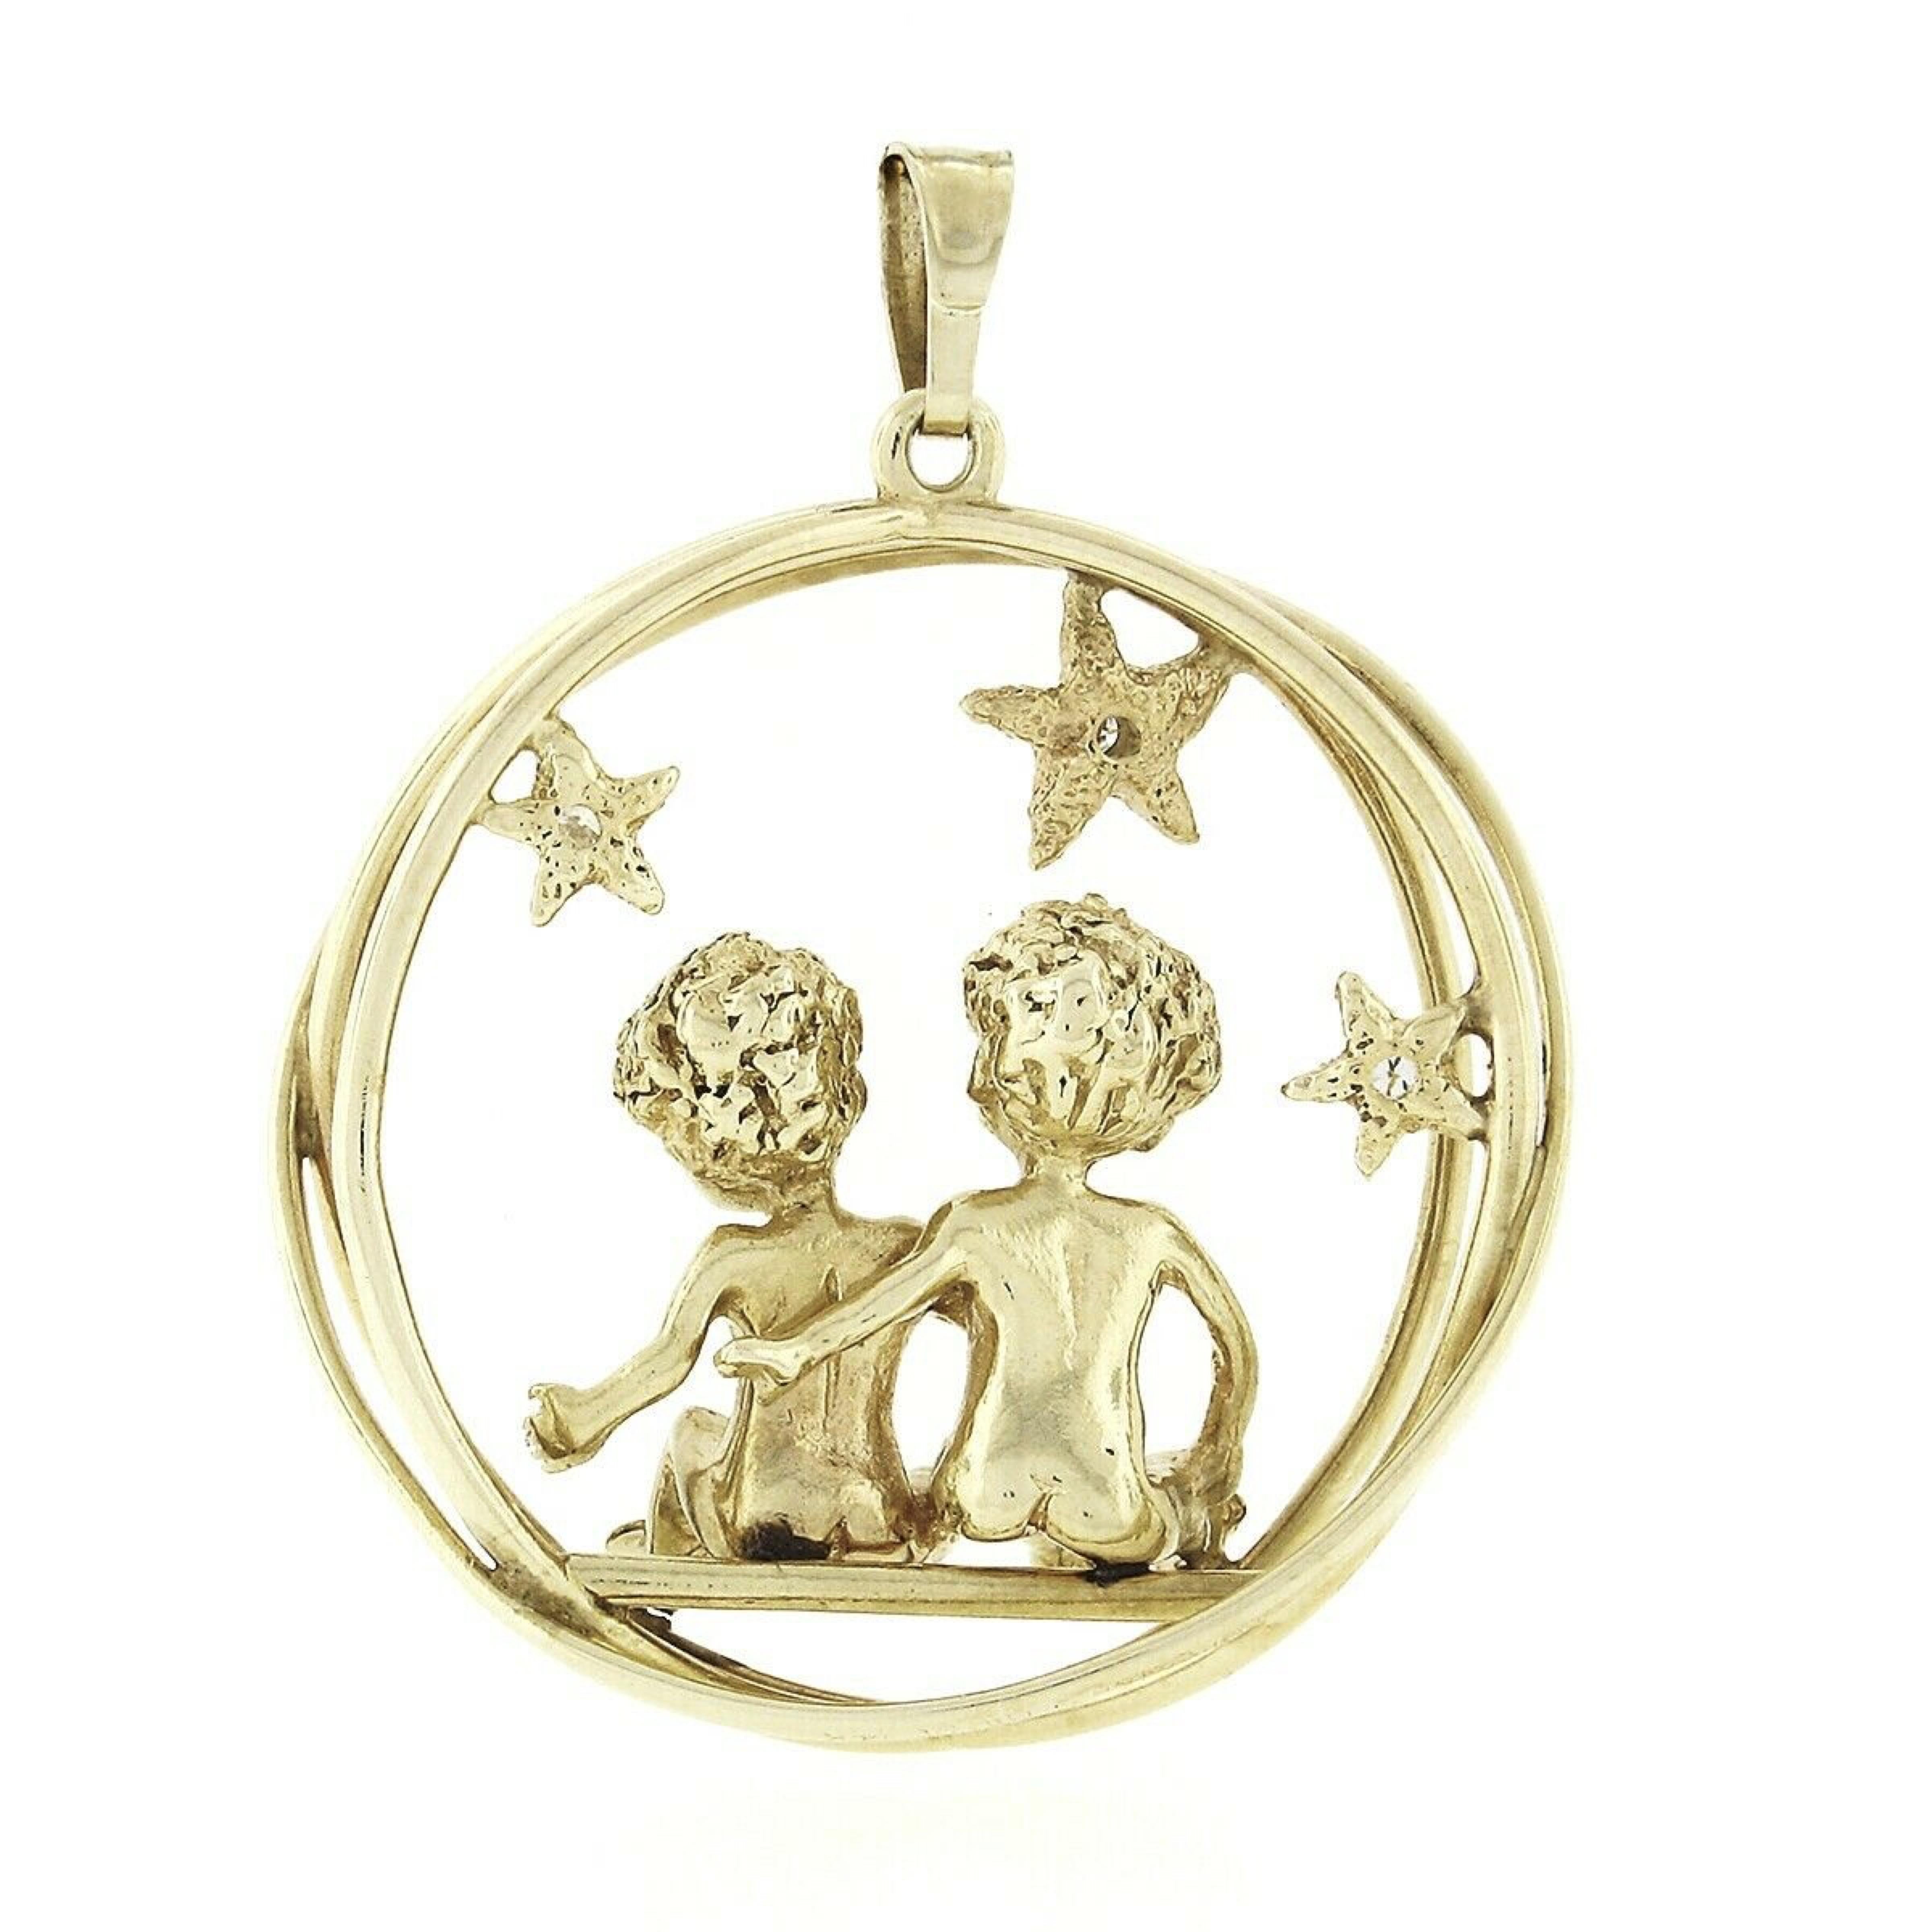 Here we have a large vintage charm/pendant crafted from solid 14 yellow gold and features a 3D scene of two children sitting under the stars in an open circle crossing design. Incredible detail is seen throughout the piece with a nice textured